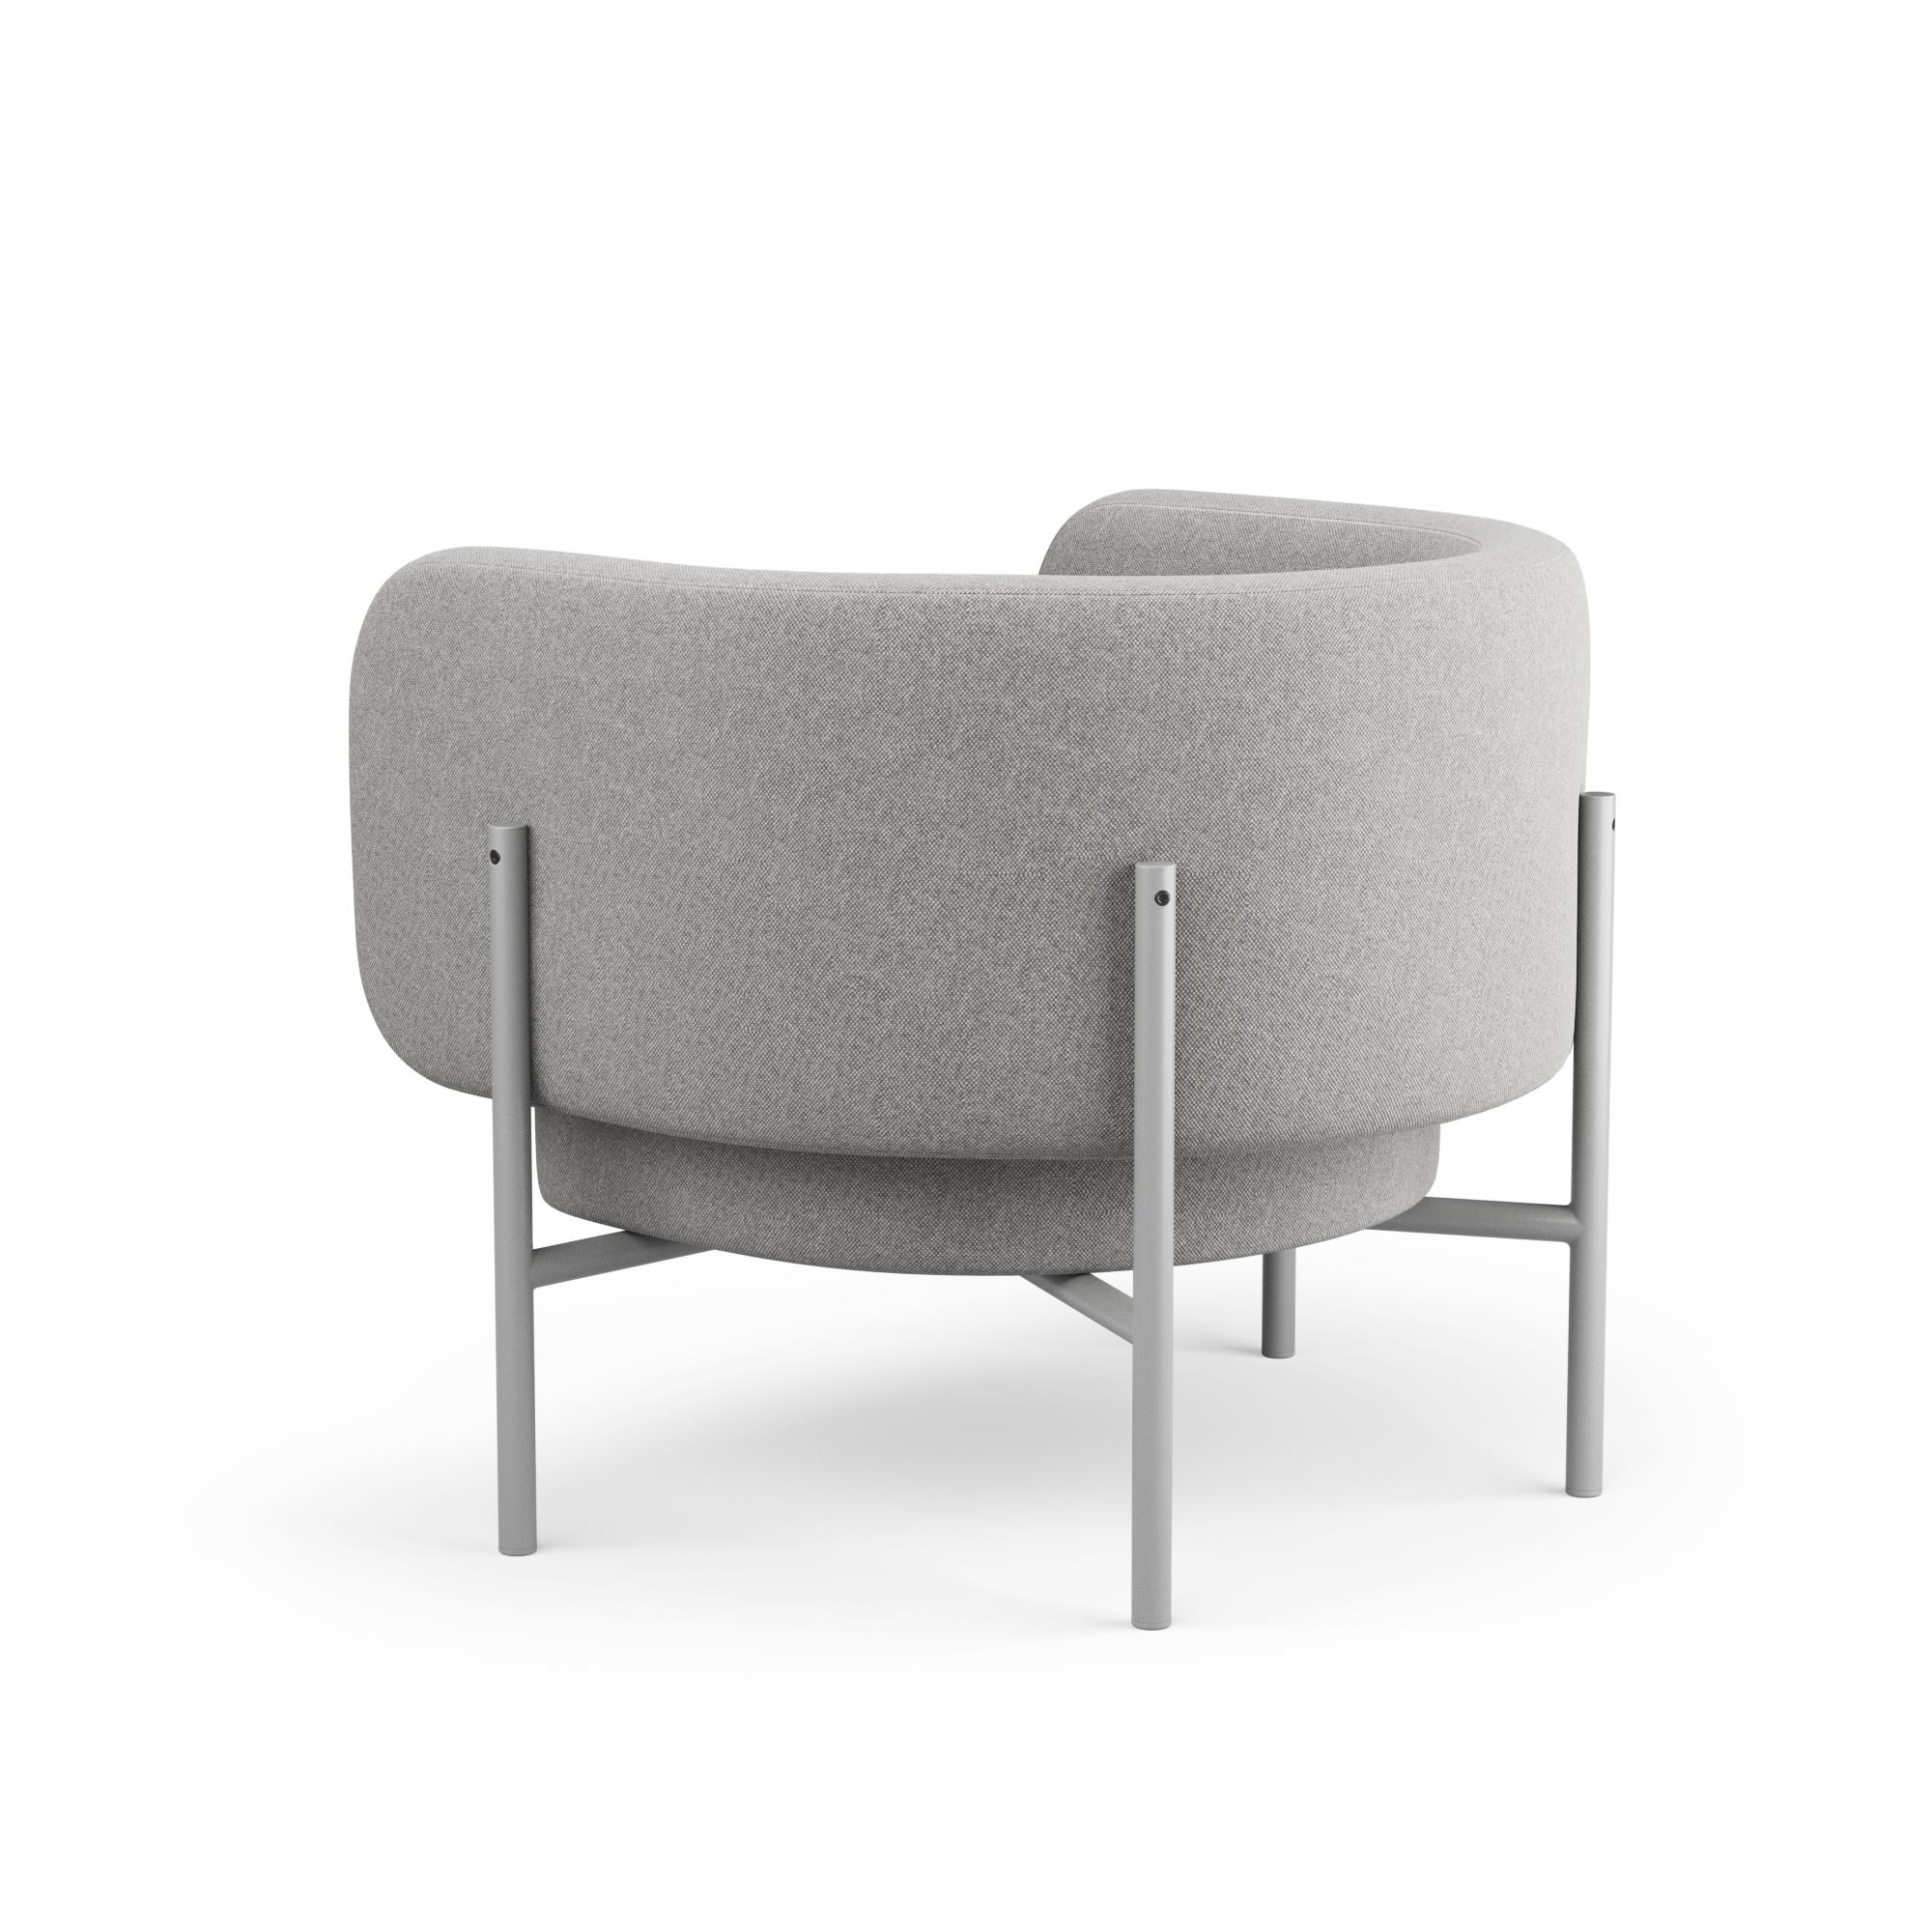 European Hayche Abrazo Armchair - Gray, UK, Made to Order For Sale